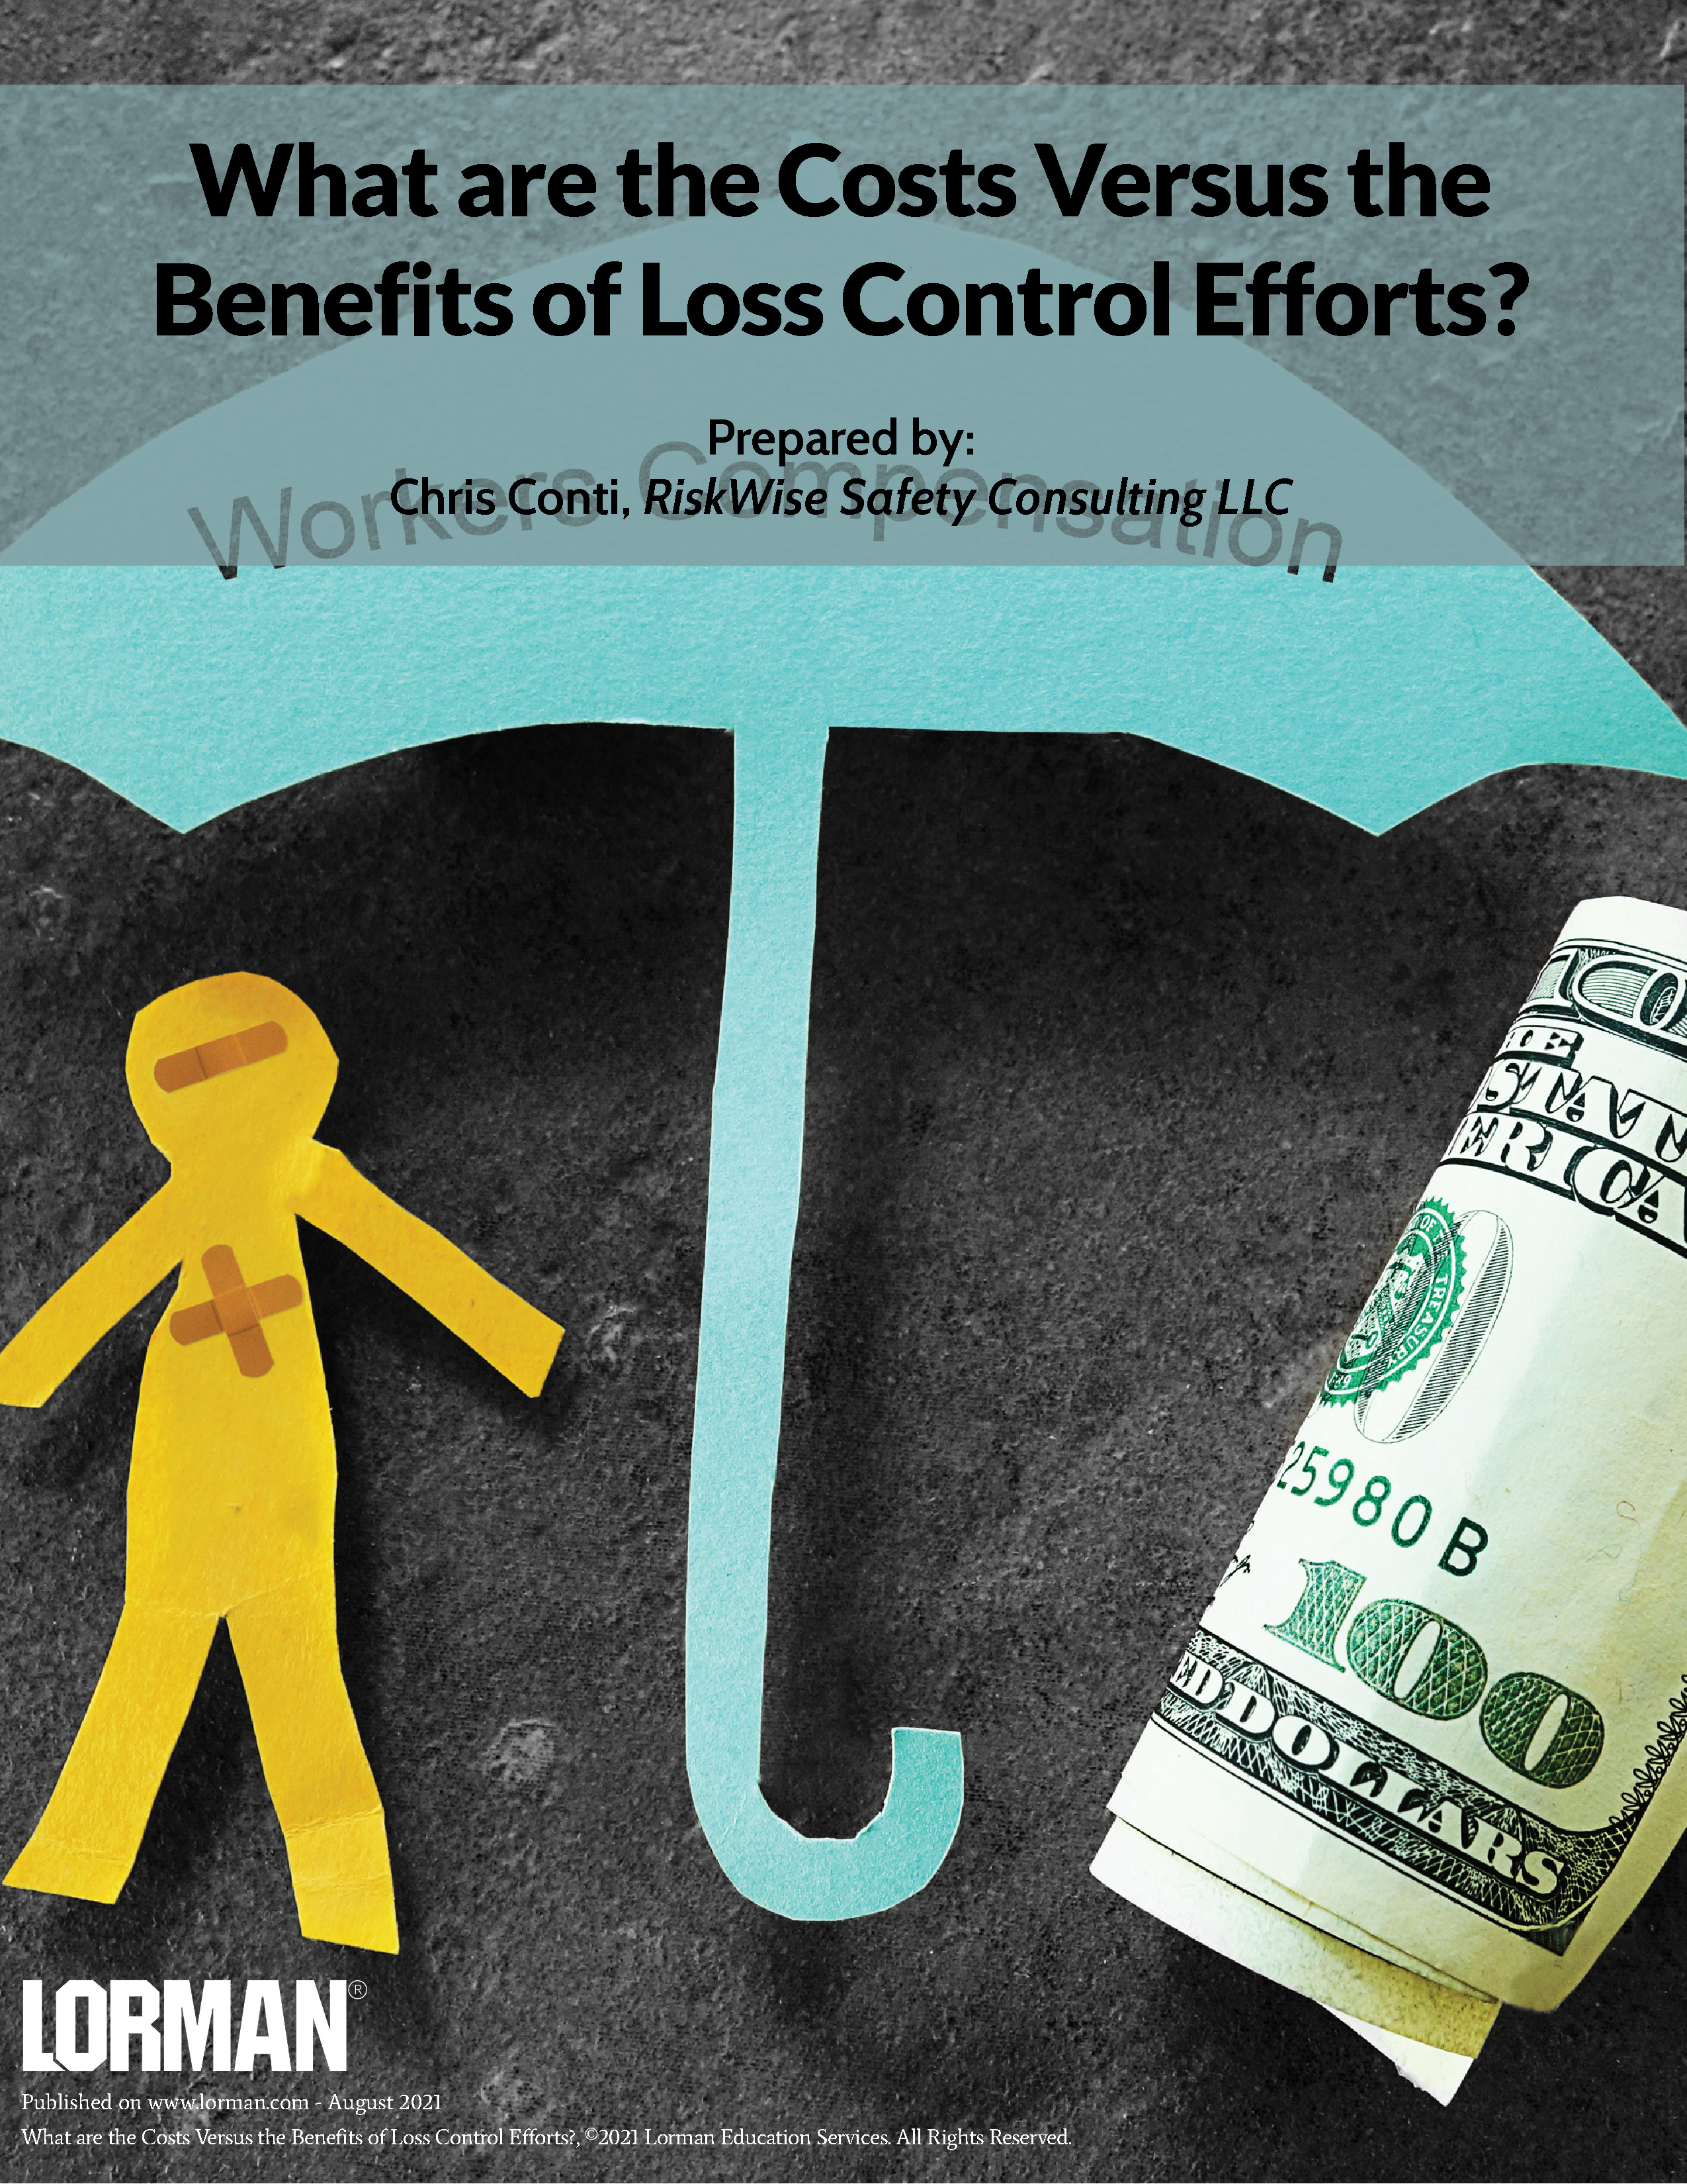 What are the Costs Versus the Benefits of Loss Control Efforts?